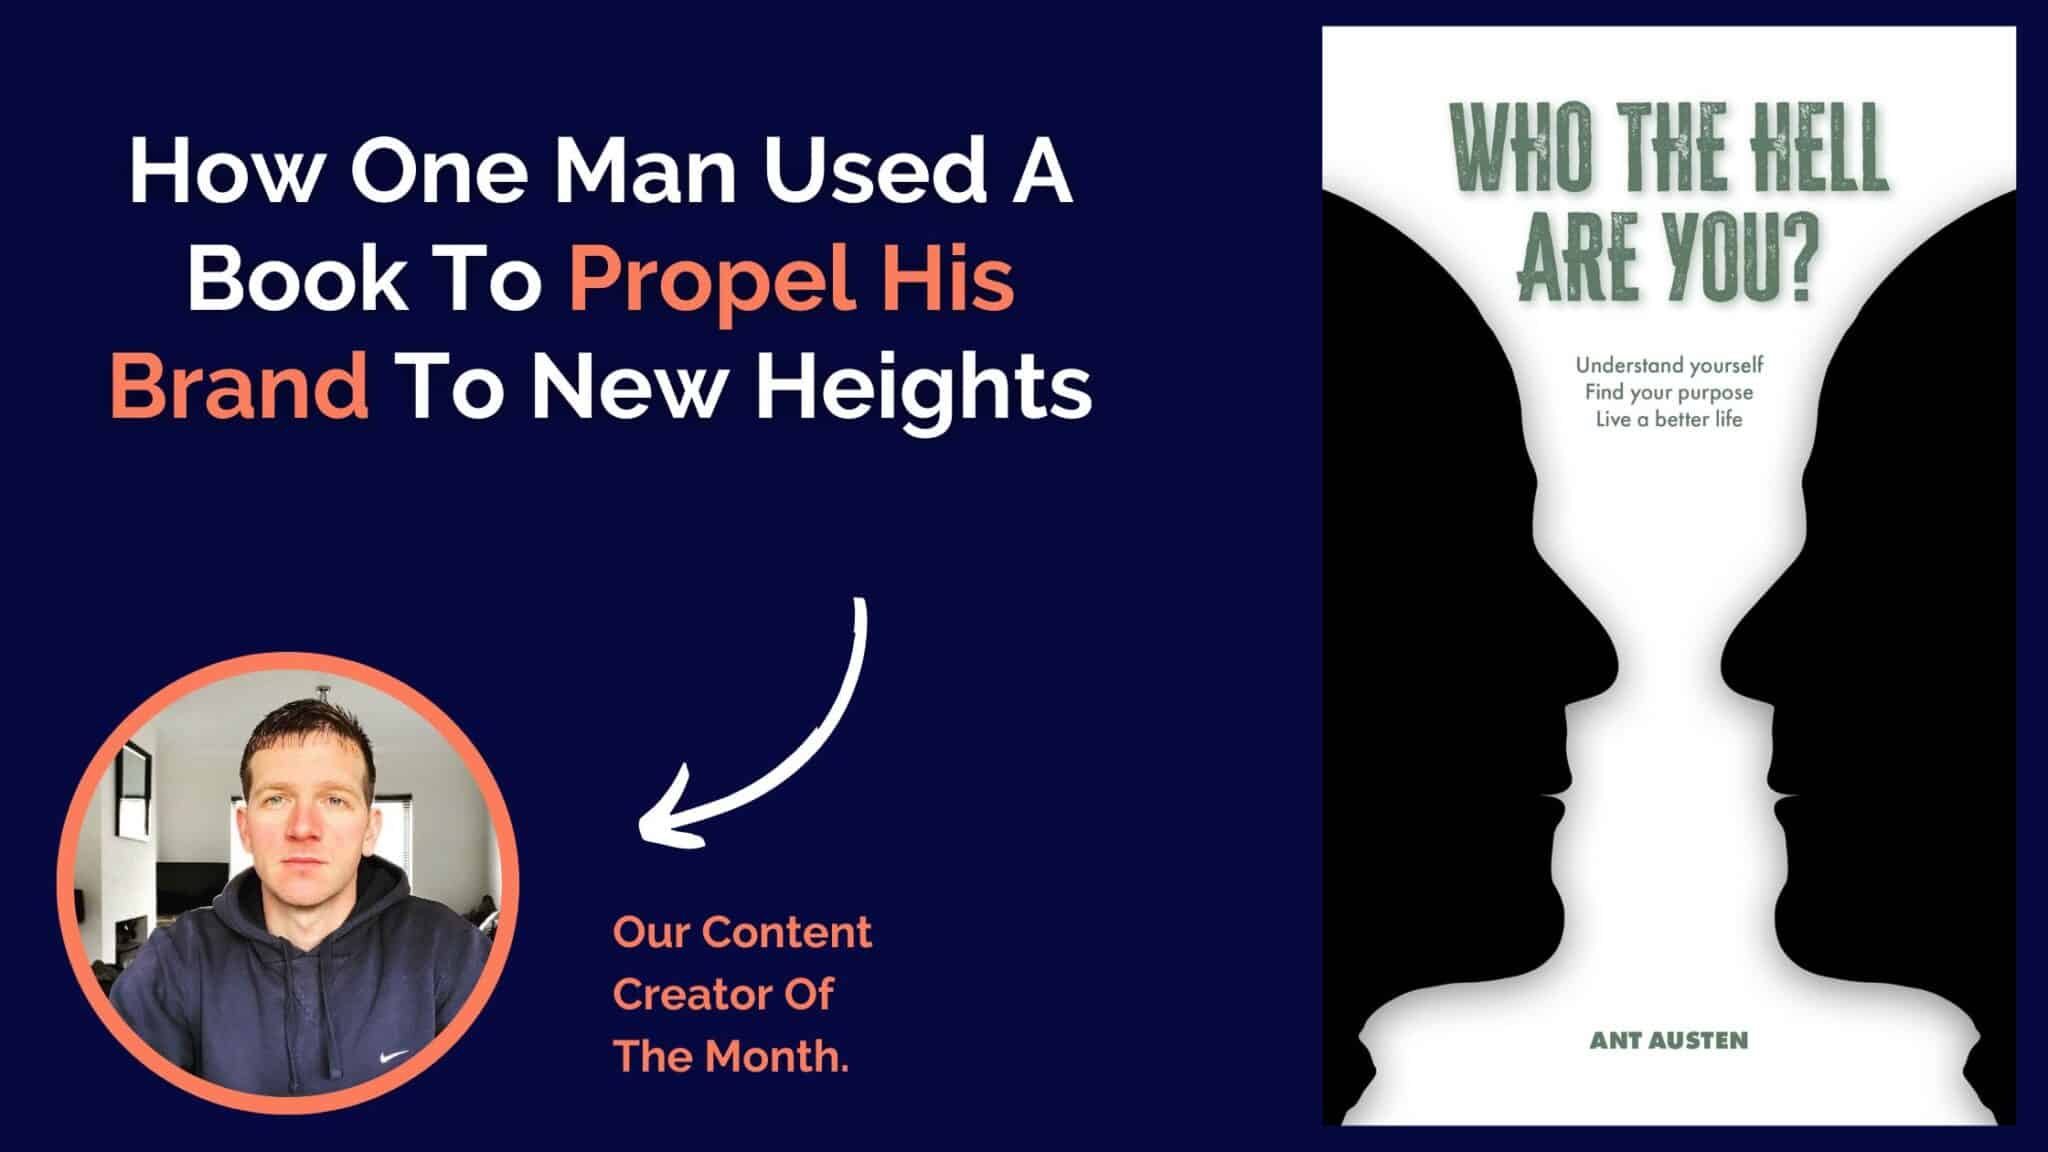 How One Man Used A Book To Propel His Brand To New Heights